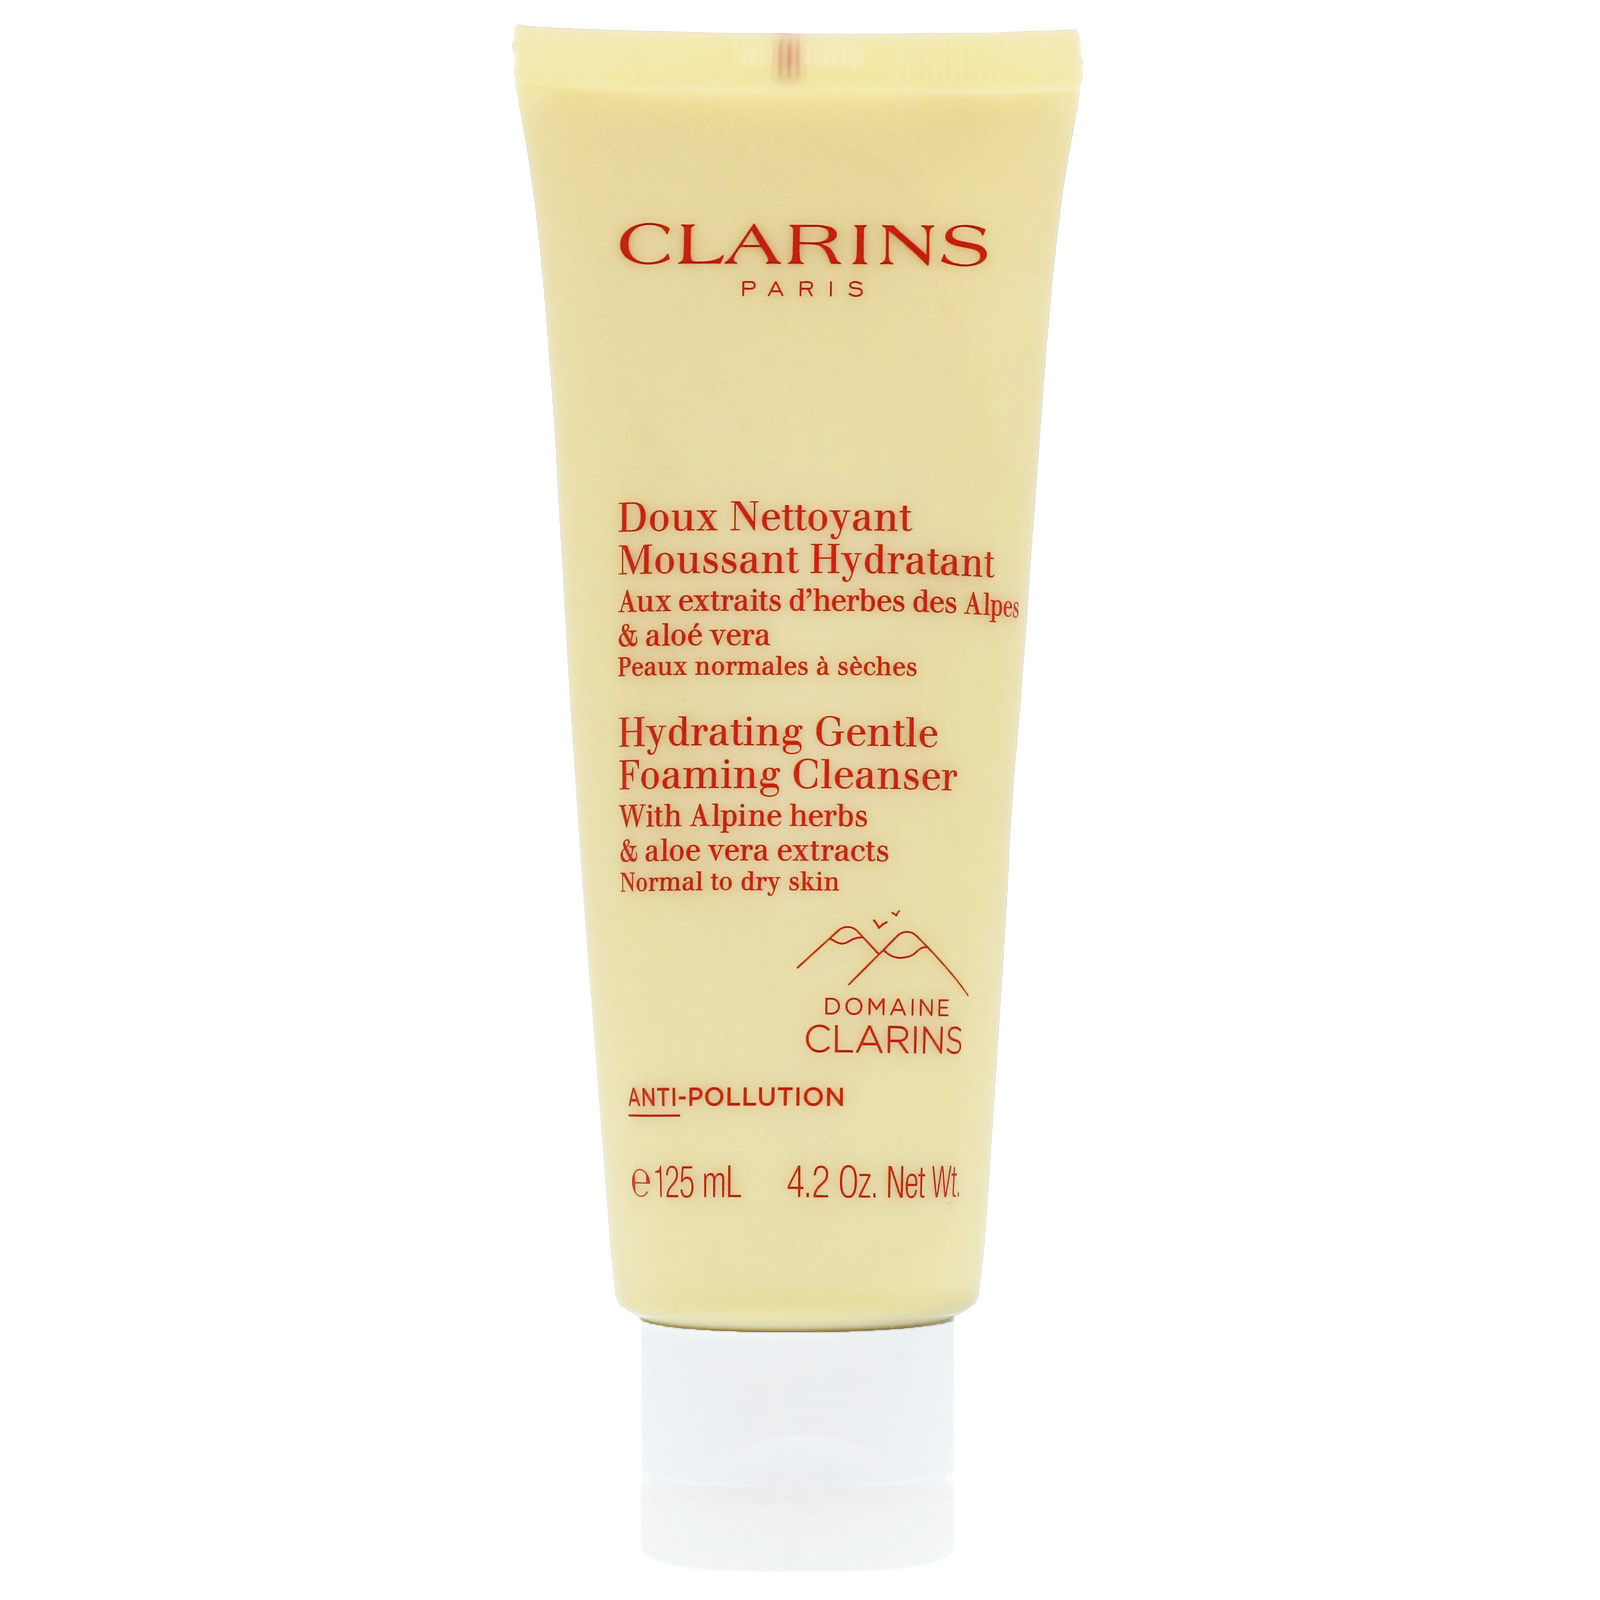 Clarins face cleanser